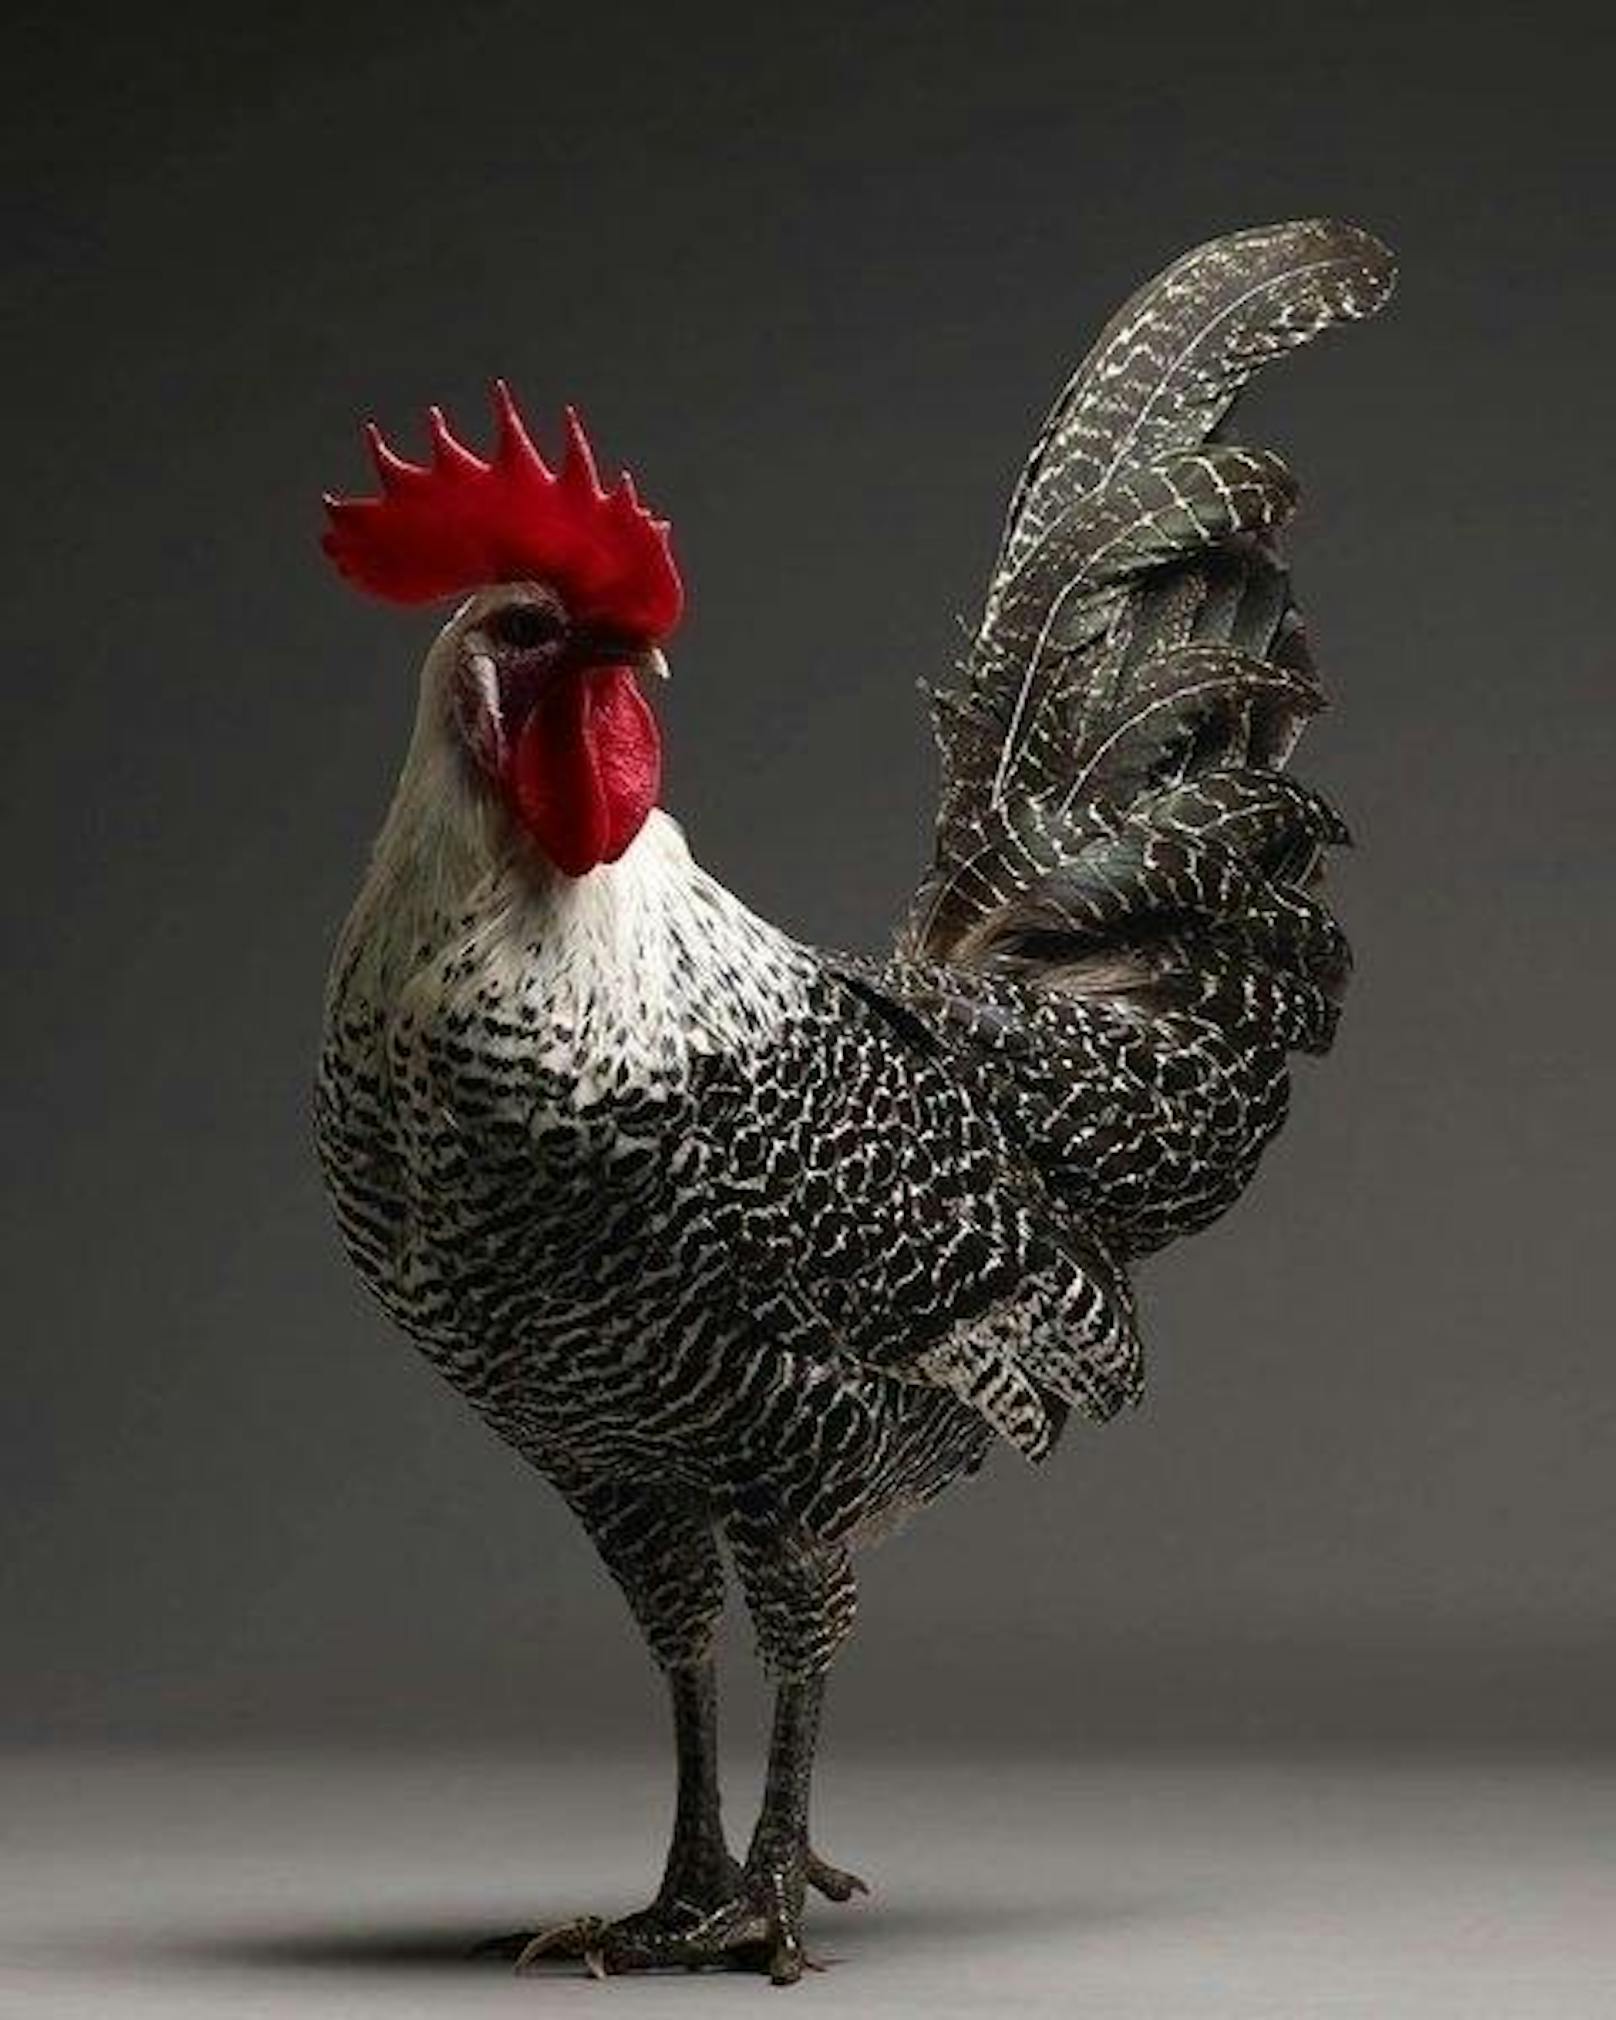 ... "Chicken - The Photographic Collection" ...